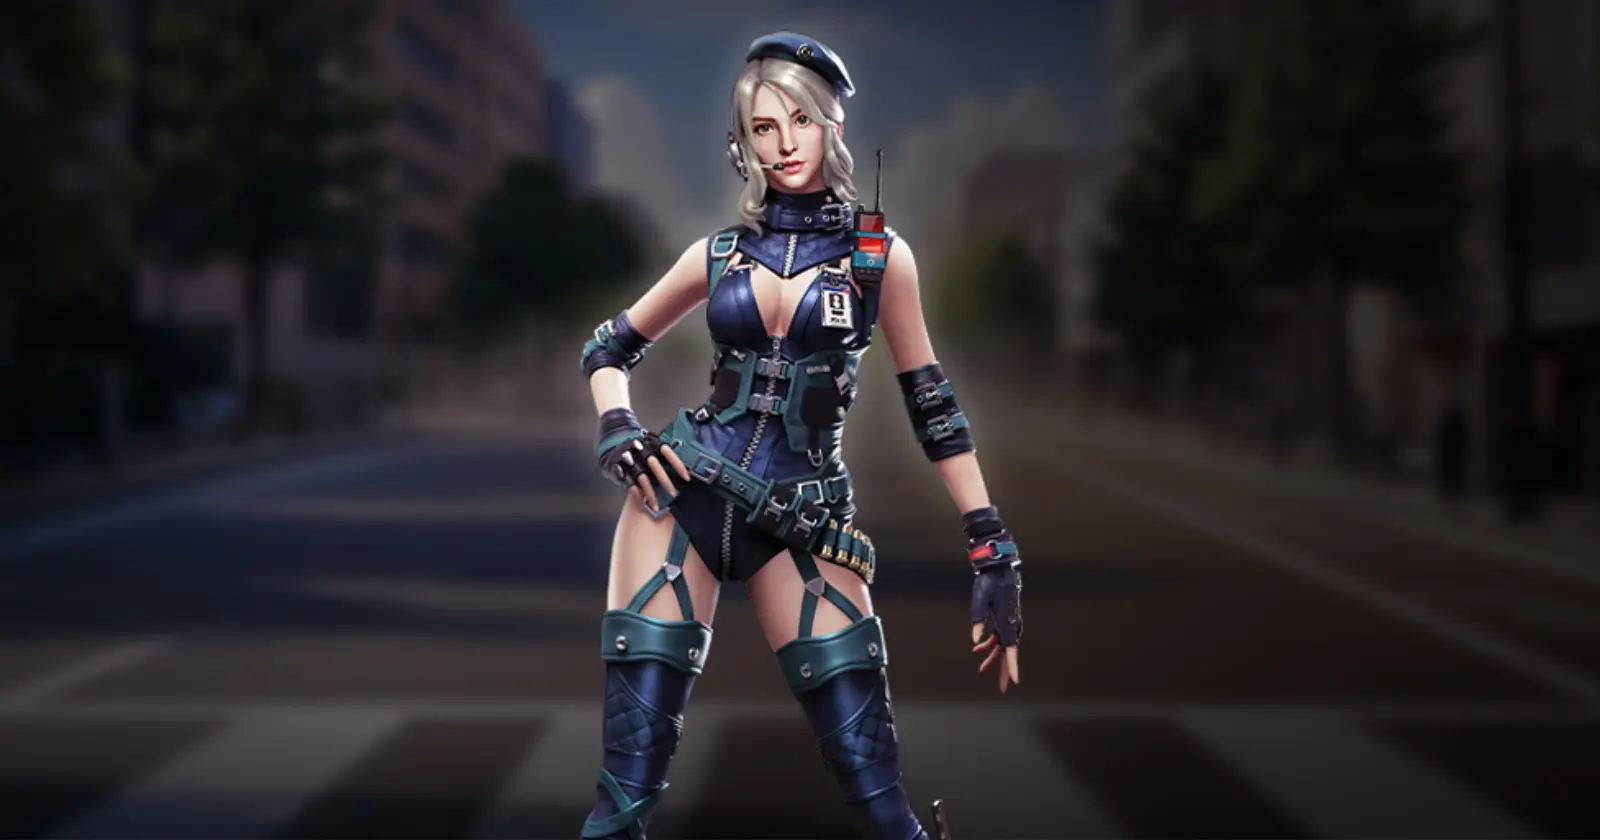 Laura, a character from the Free Fire game, stands wearing stylish clothes against a dark, blurred street background.